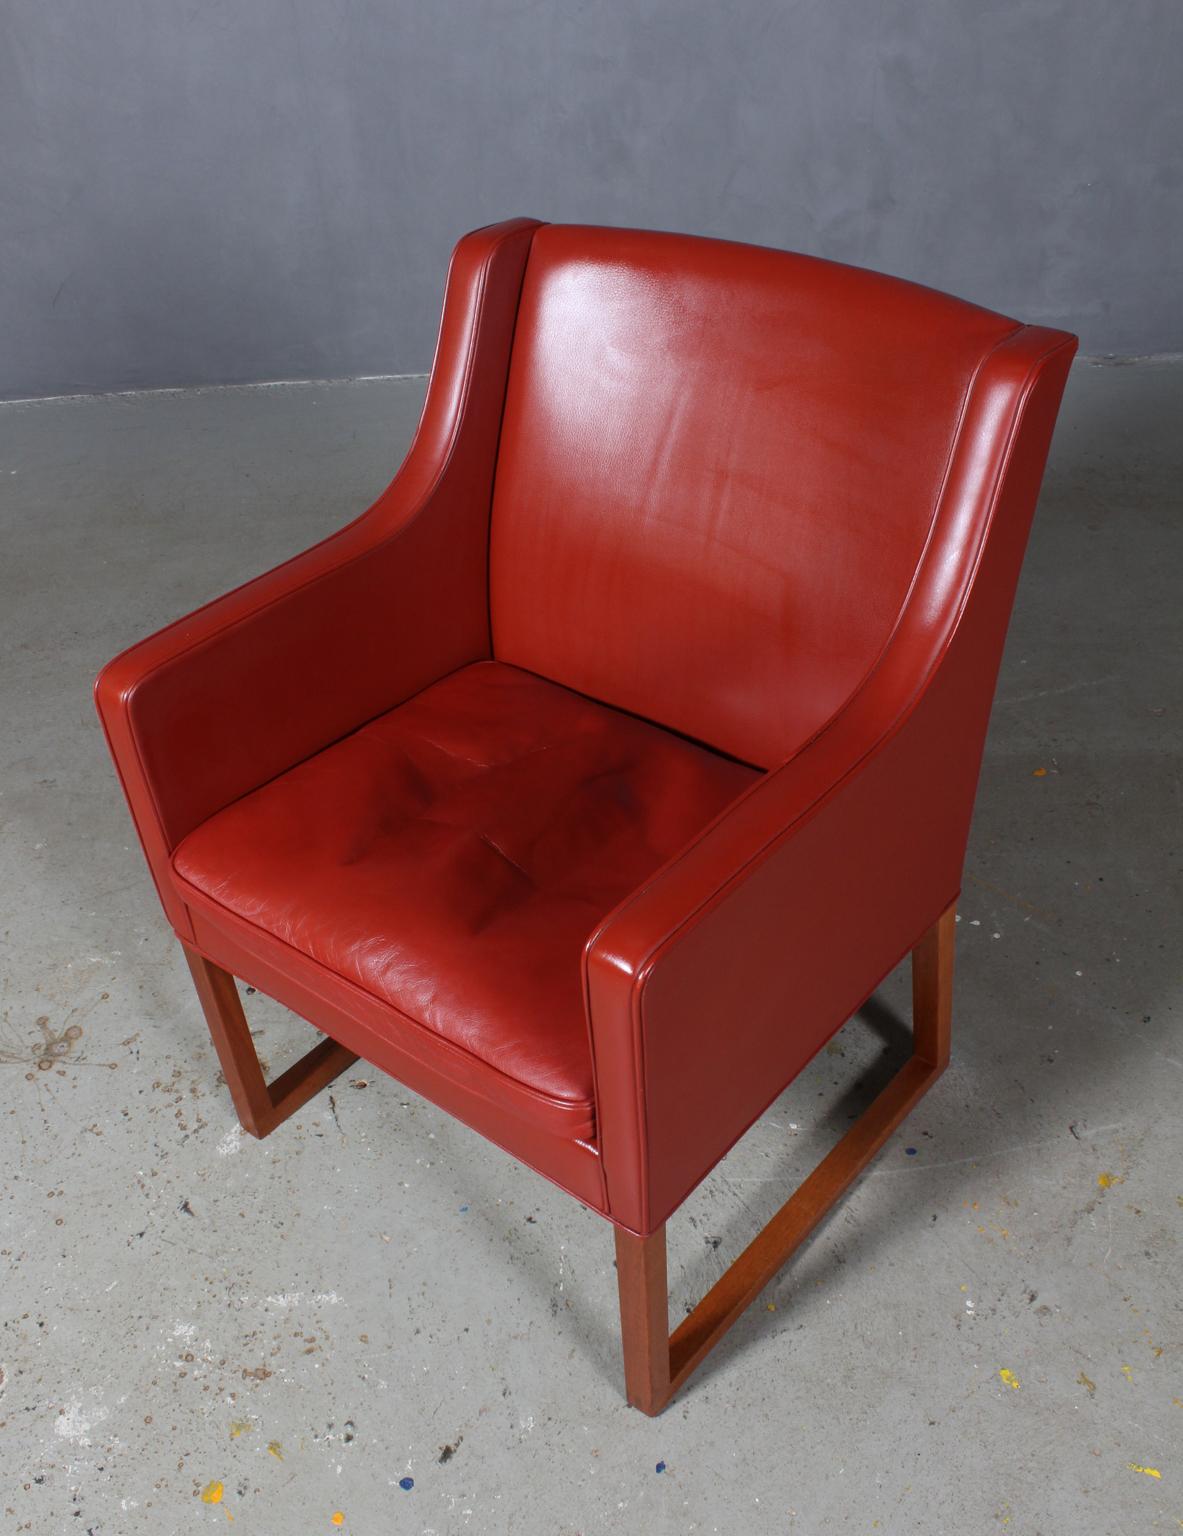 Børge Mogensen lounge chair original upholstered with red leather.

Legs of mahogany.

Model 3246, made by Fredericia Furniture.